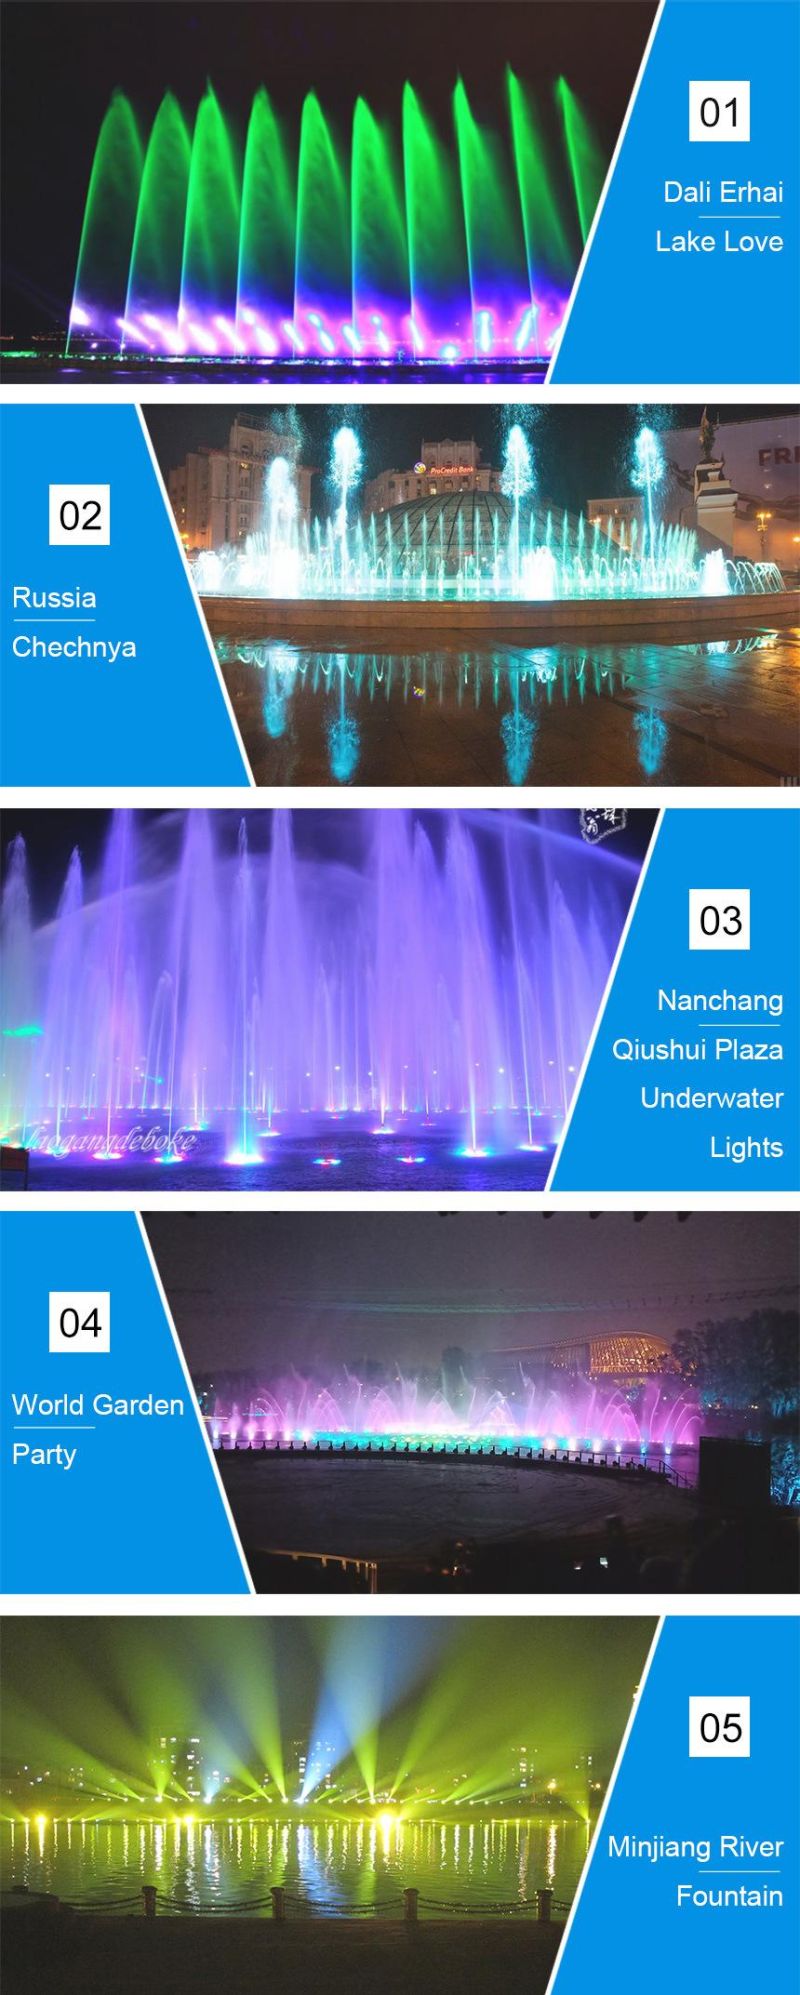 IP68 AC/DC 24V Stainless Steel Fountain Pond Swimming Pool LED Underwater Light